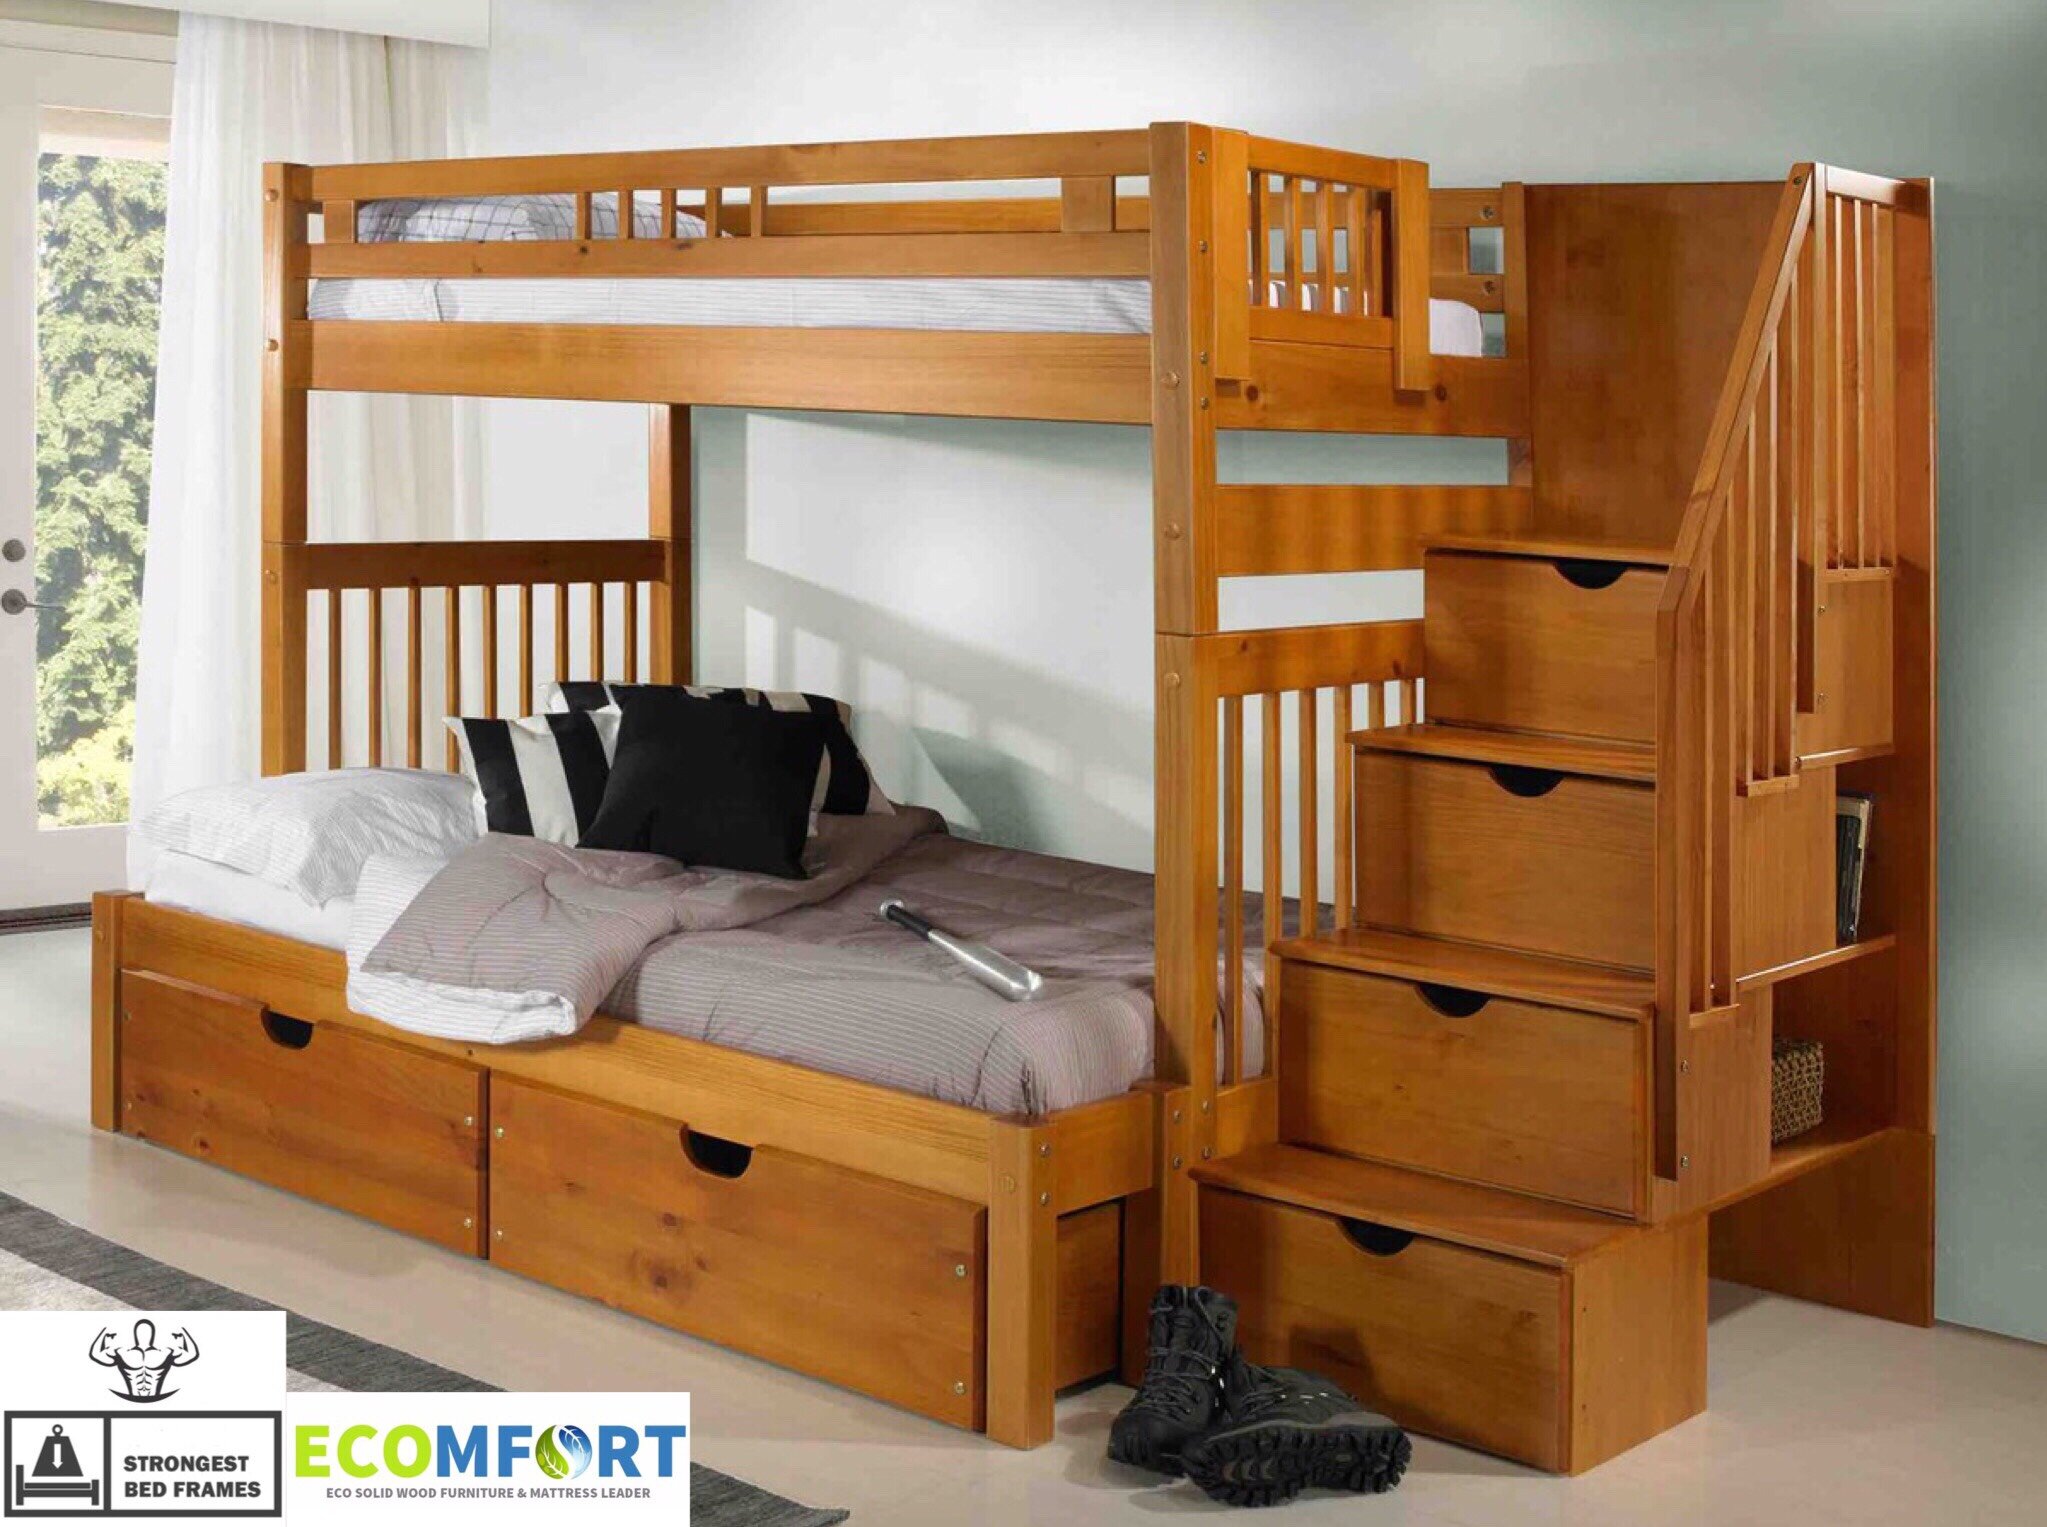 wooden bunk beds with mattresses